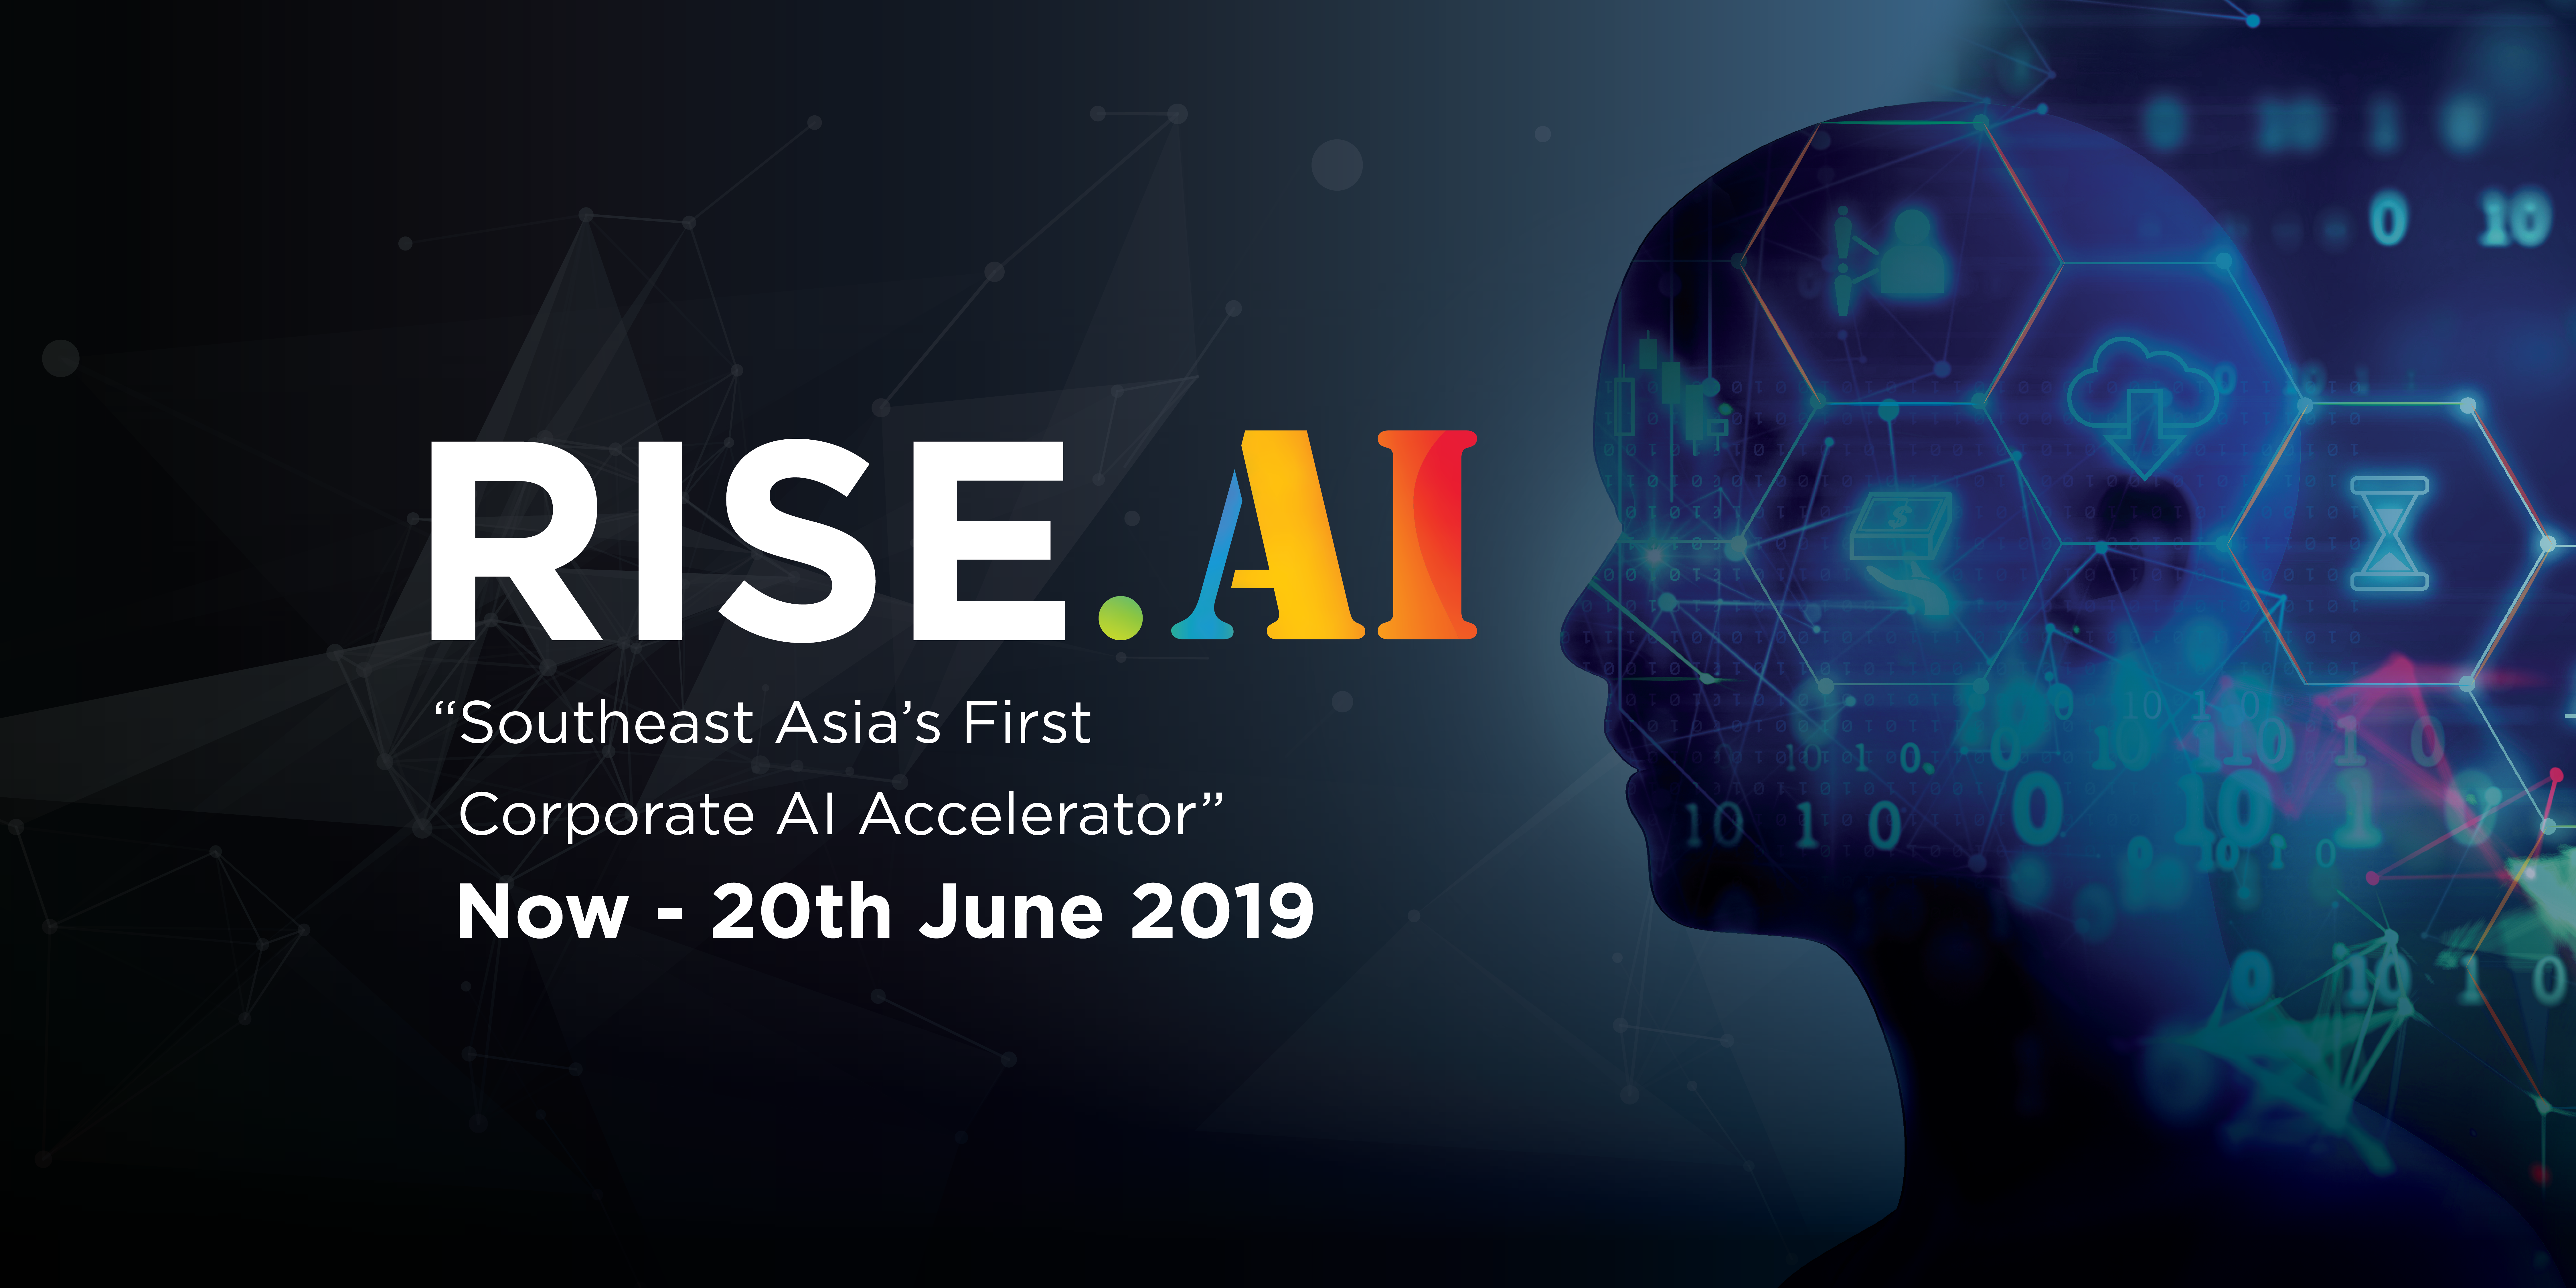 Southeast Asia’s RISE.AI accelerator open for international applications until June 20